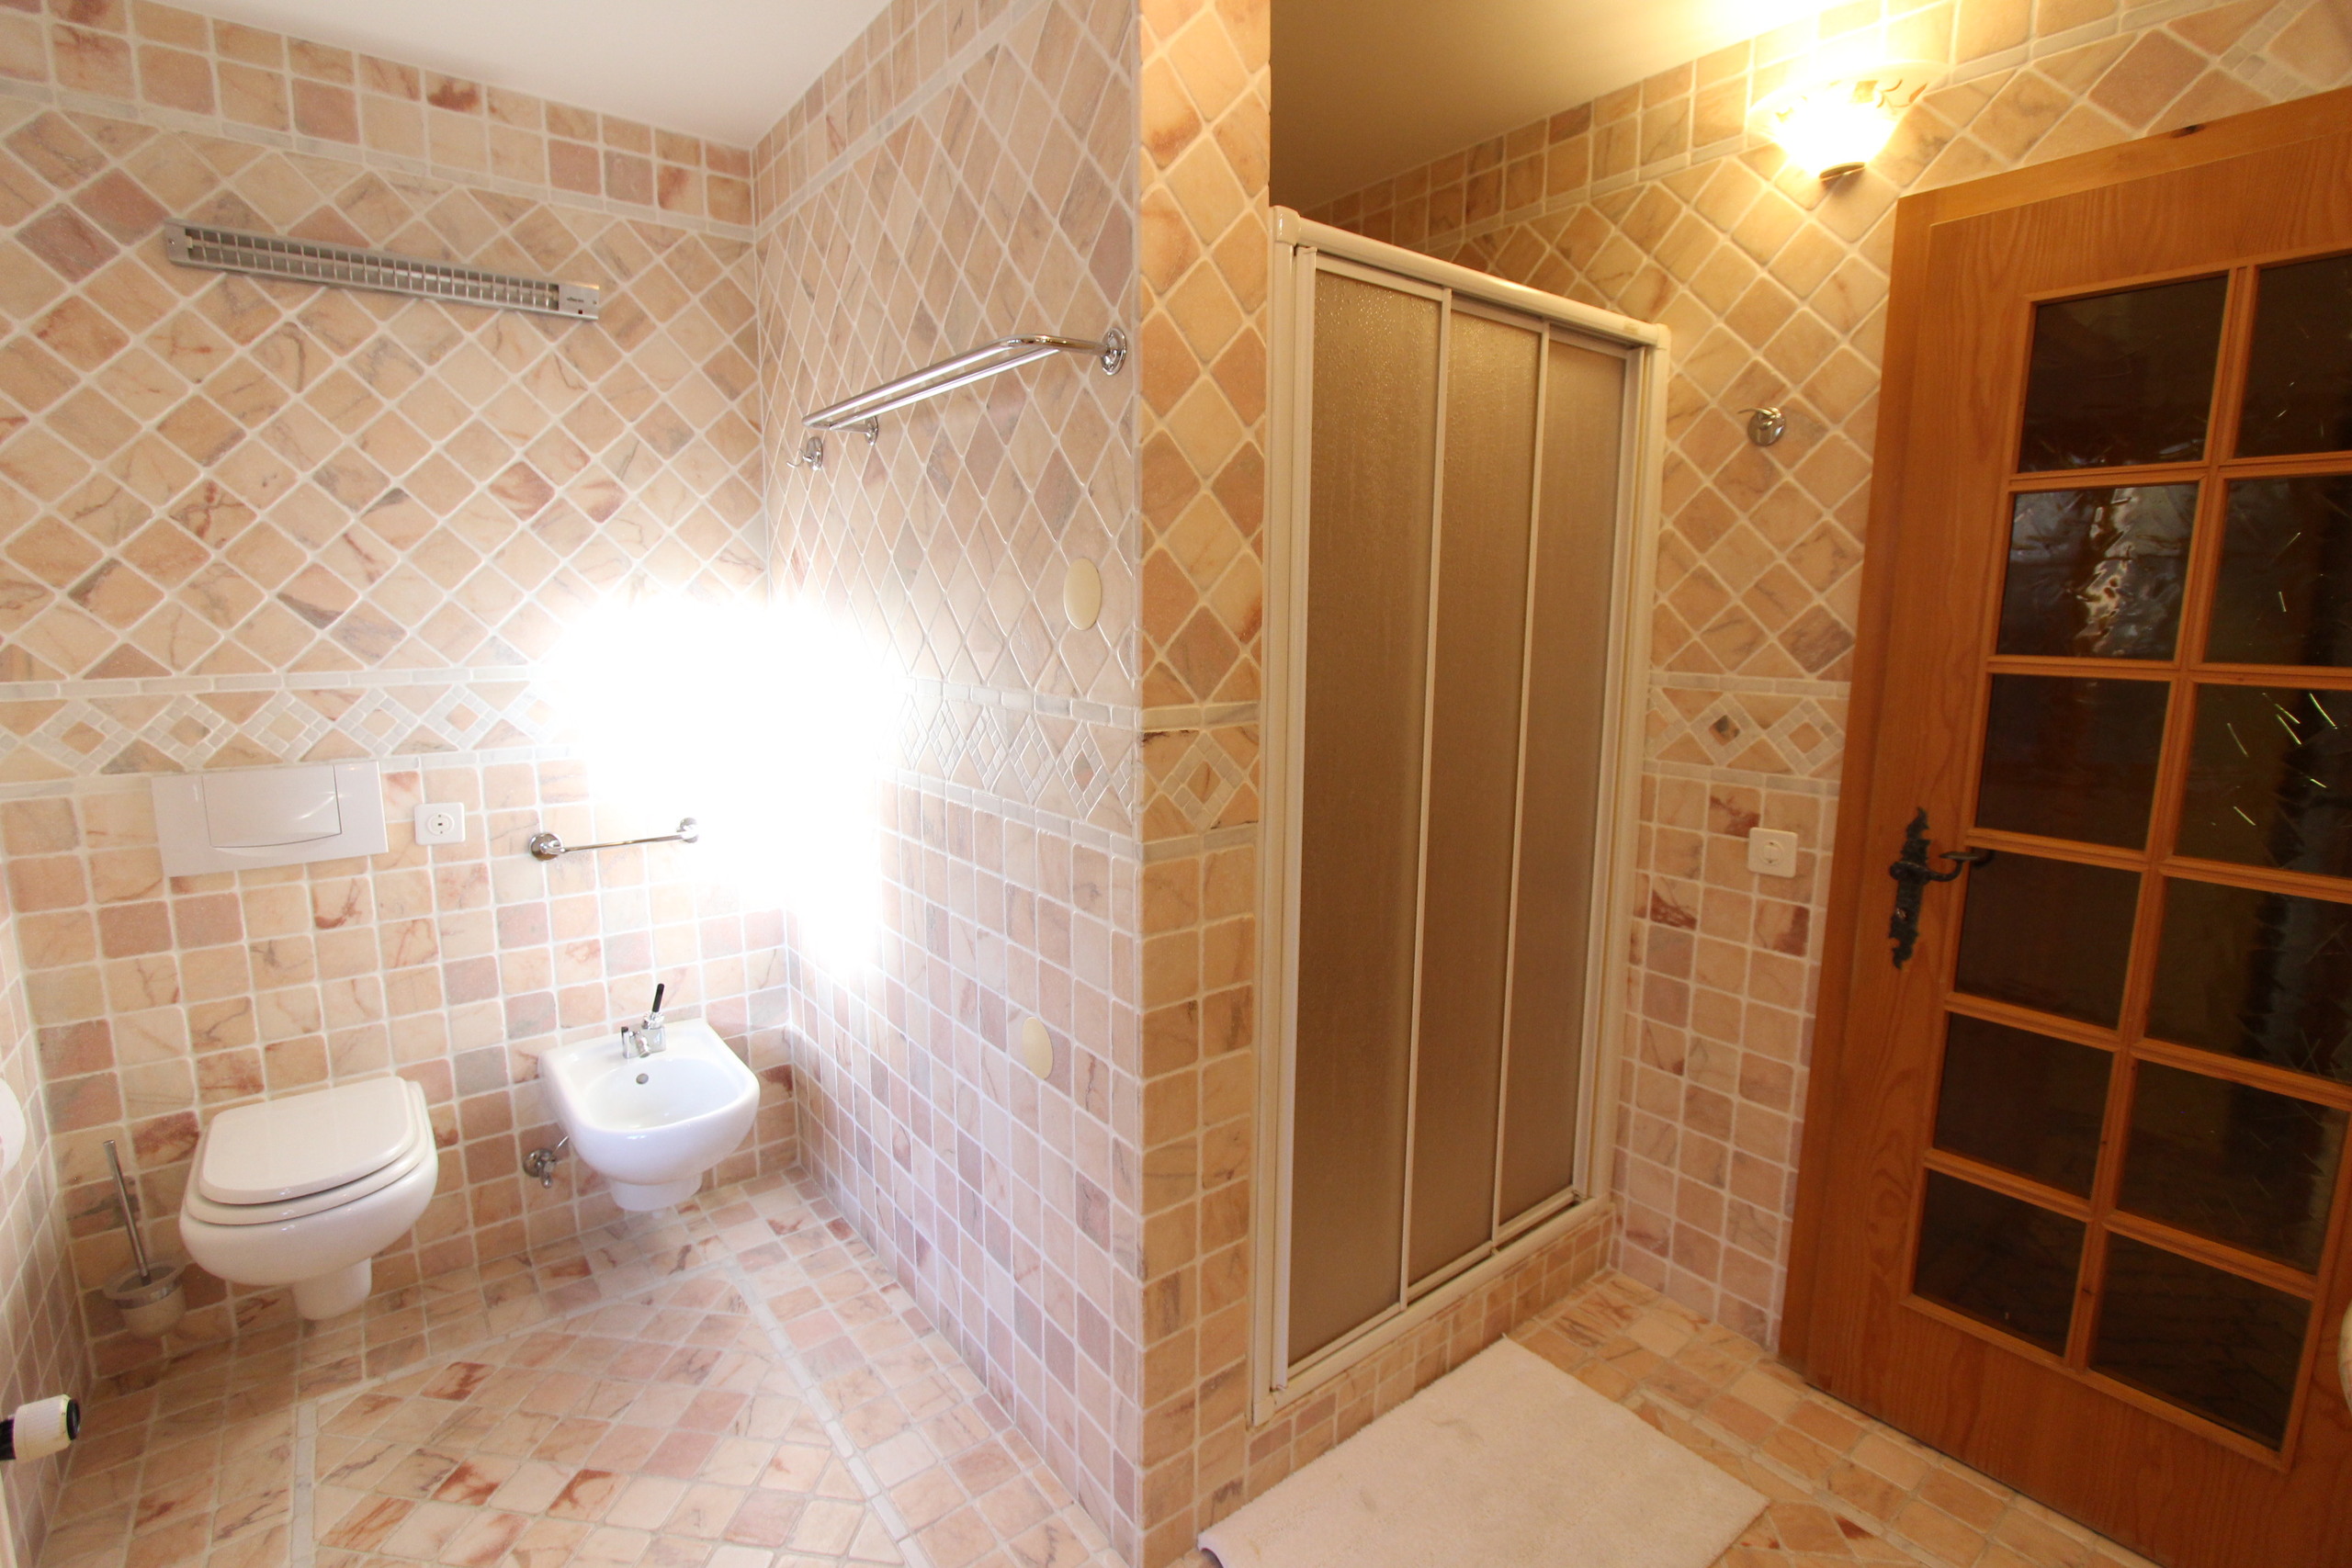 First Floor / Private bathroom with shower, double sink, bidet and toilet